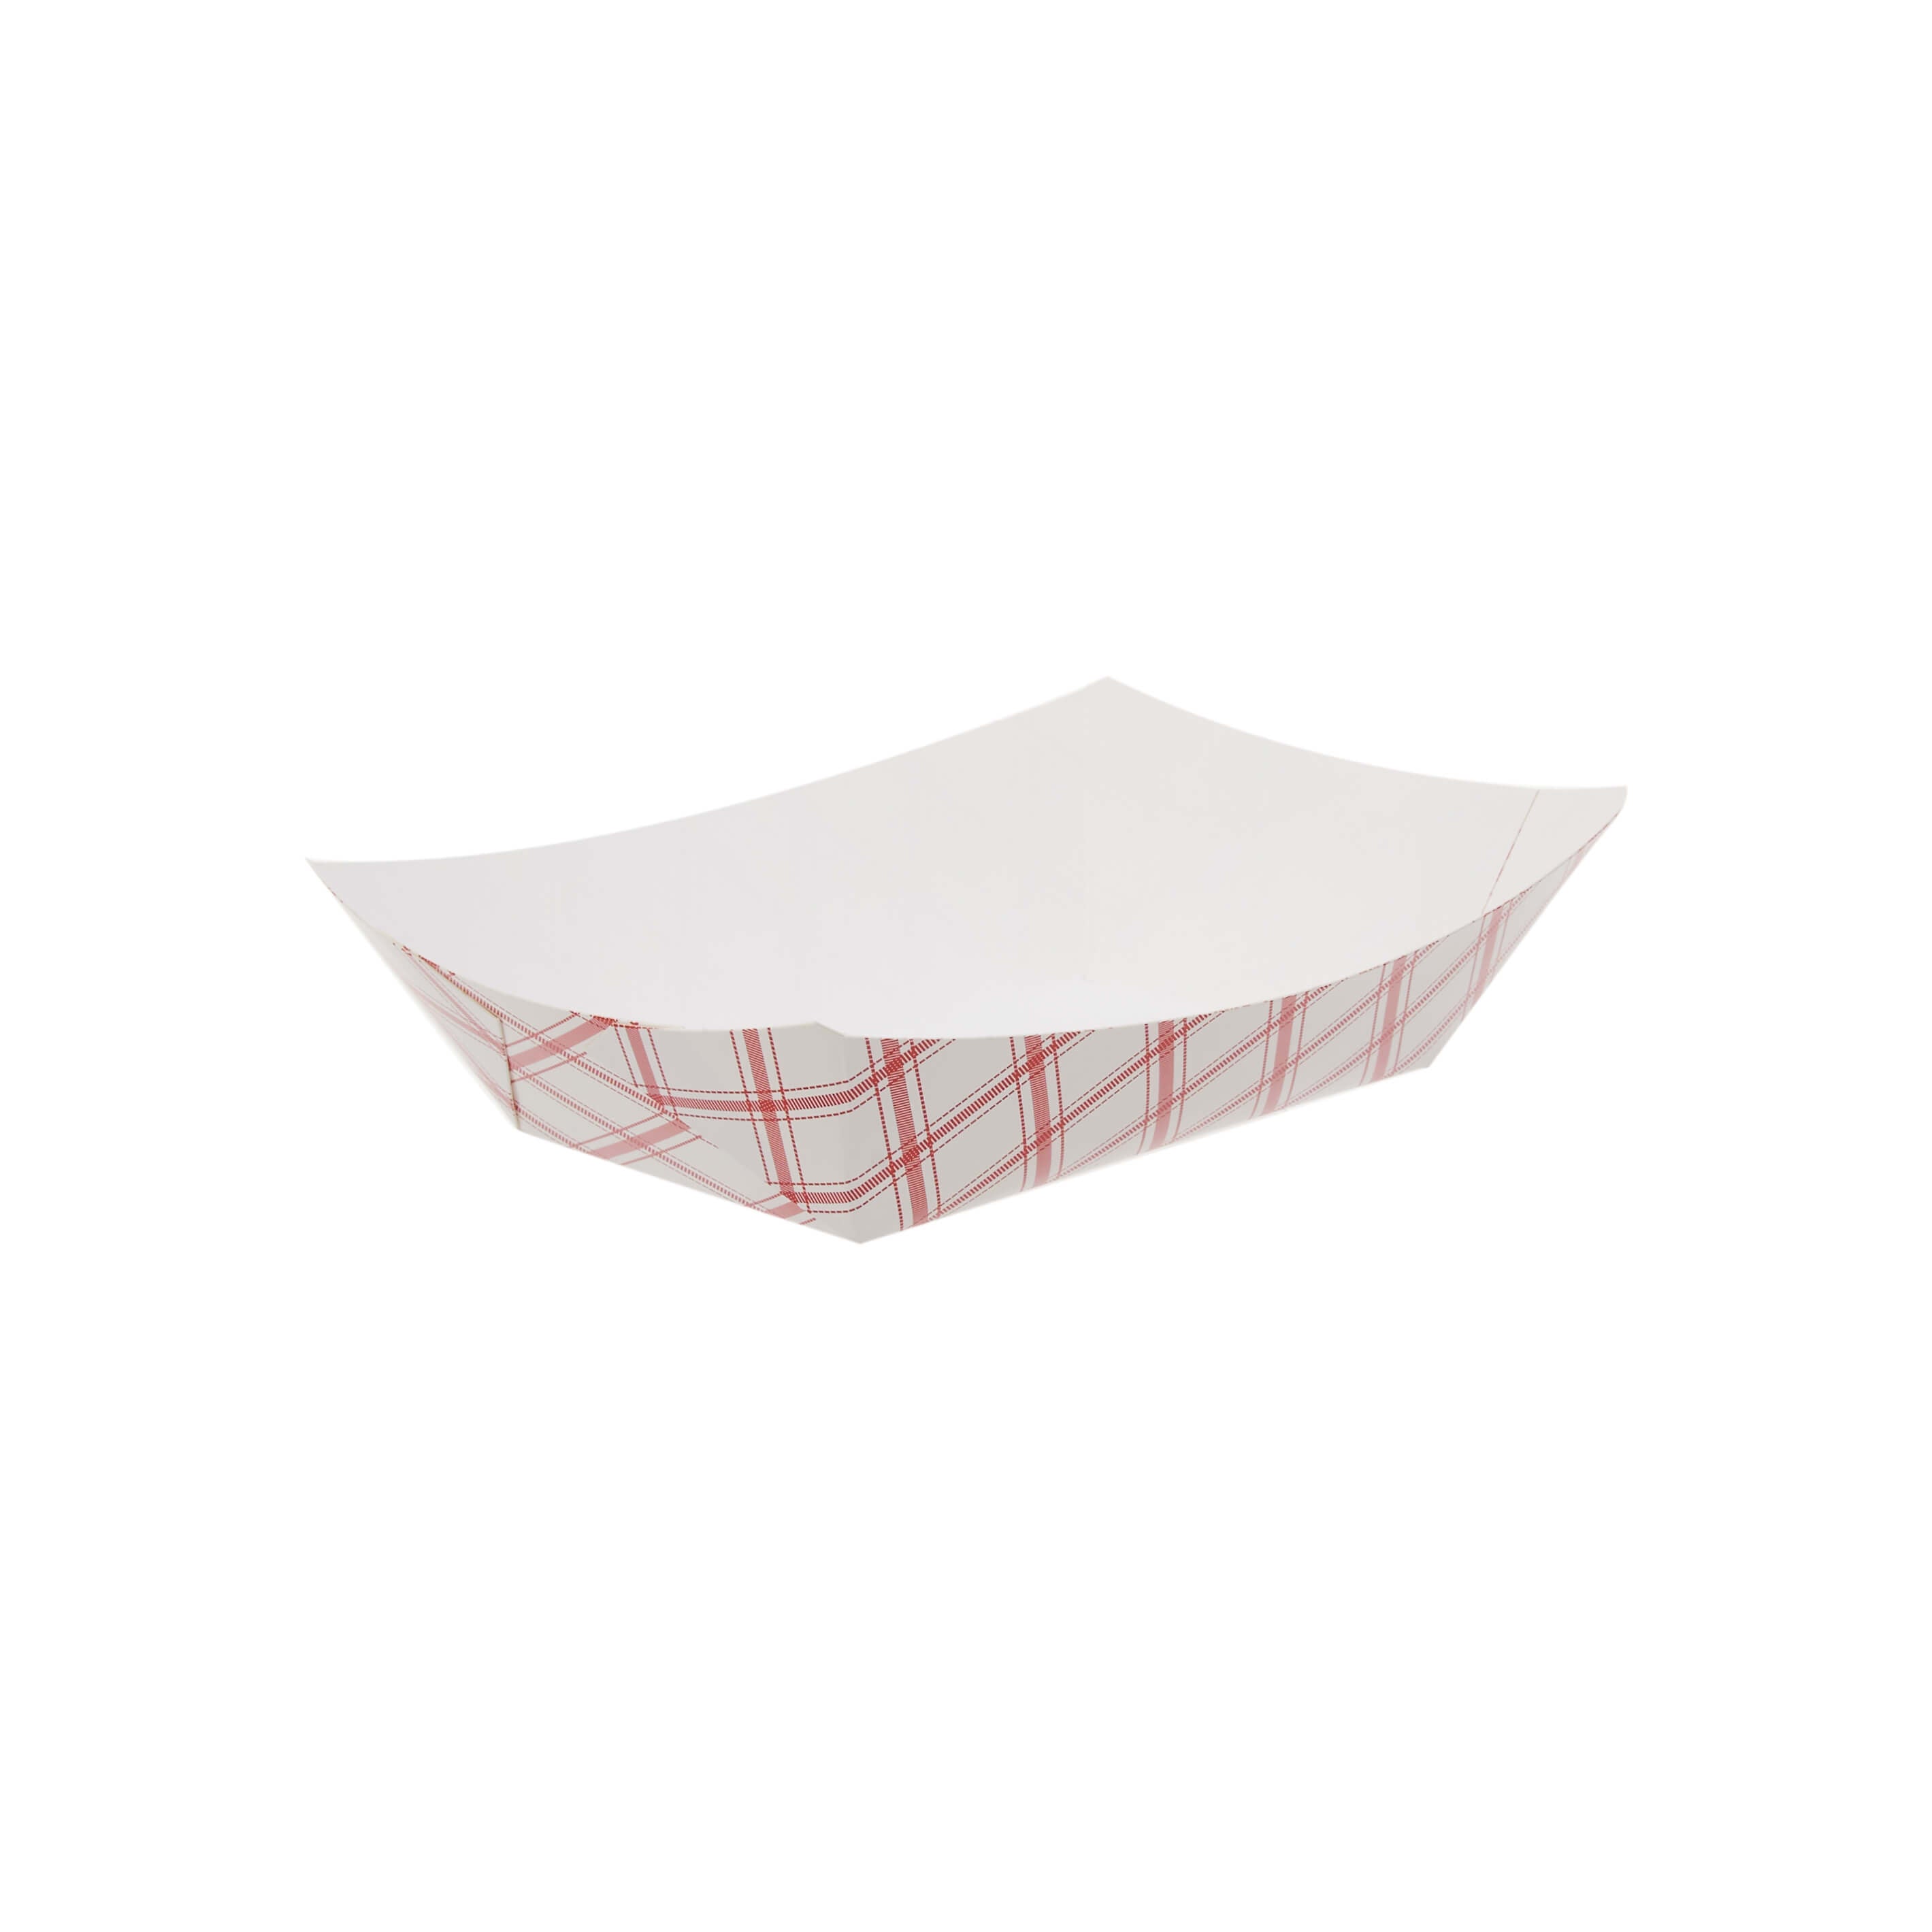 Red and White Boat Tray 2 lb #200 - Hotpack Global